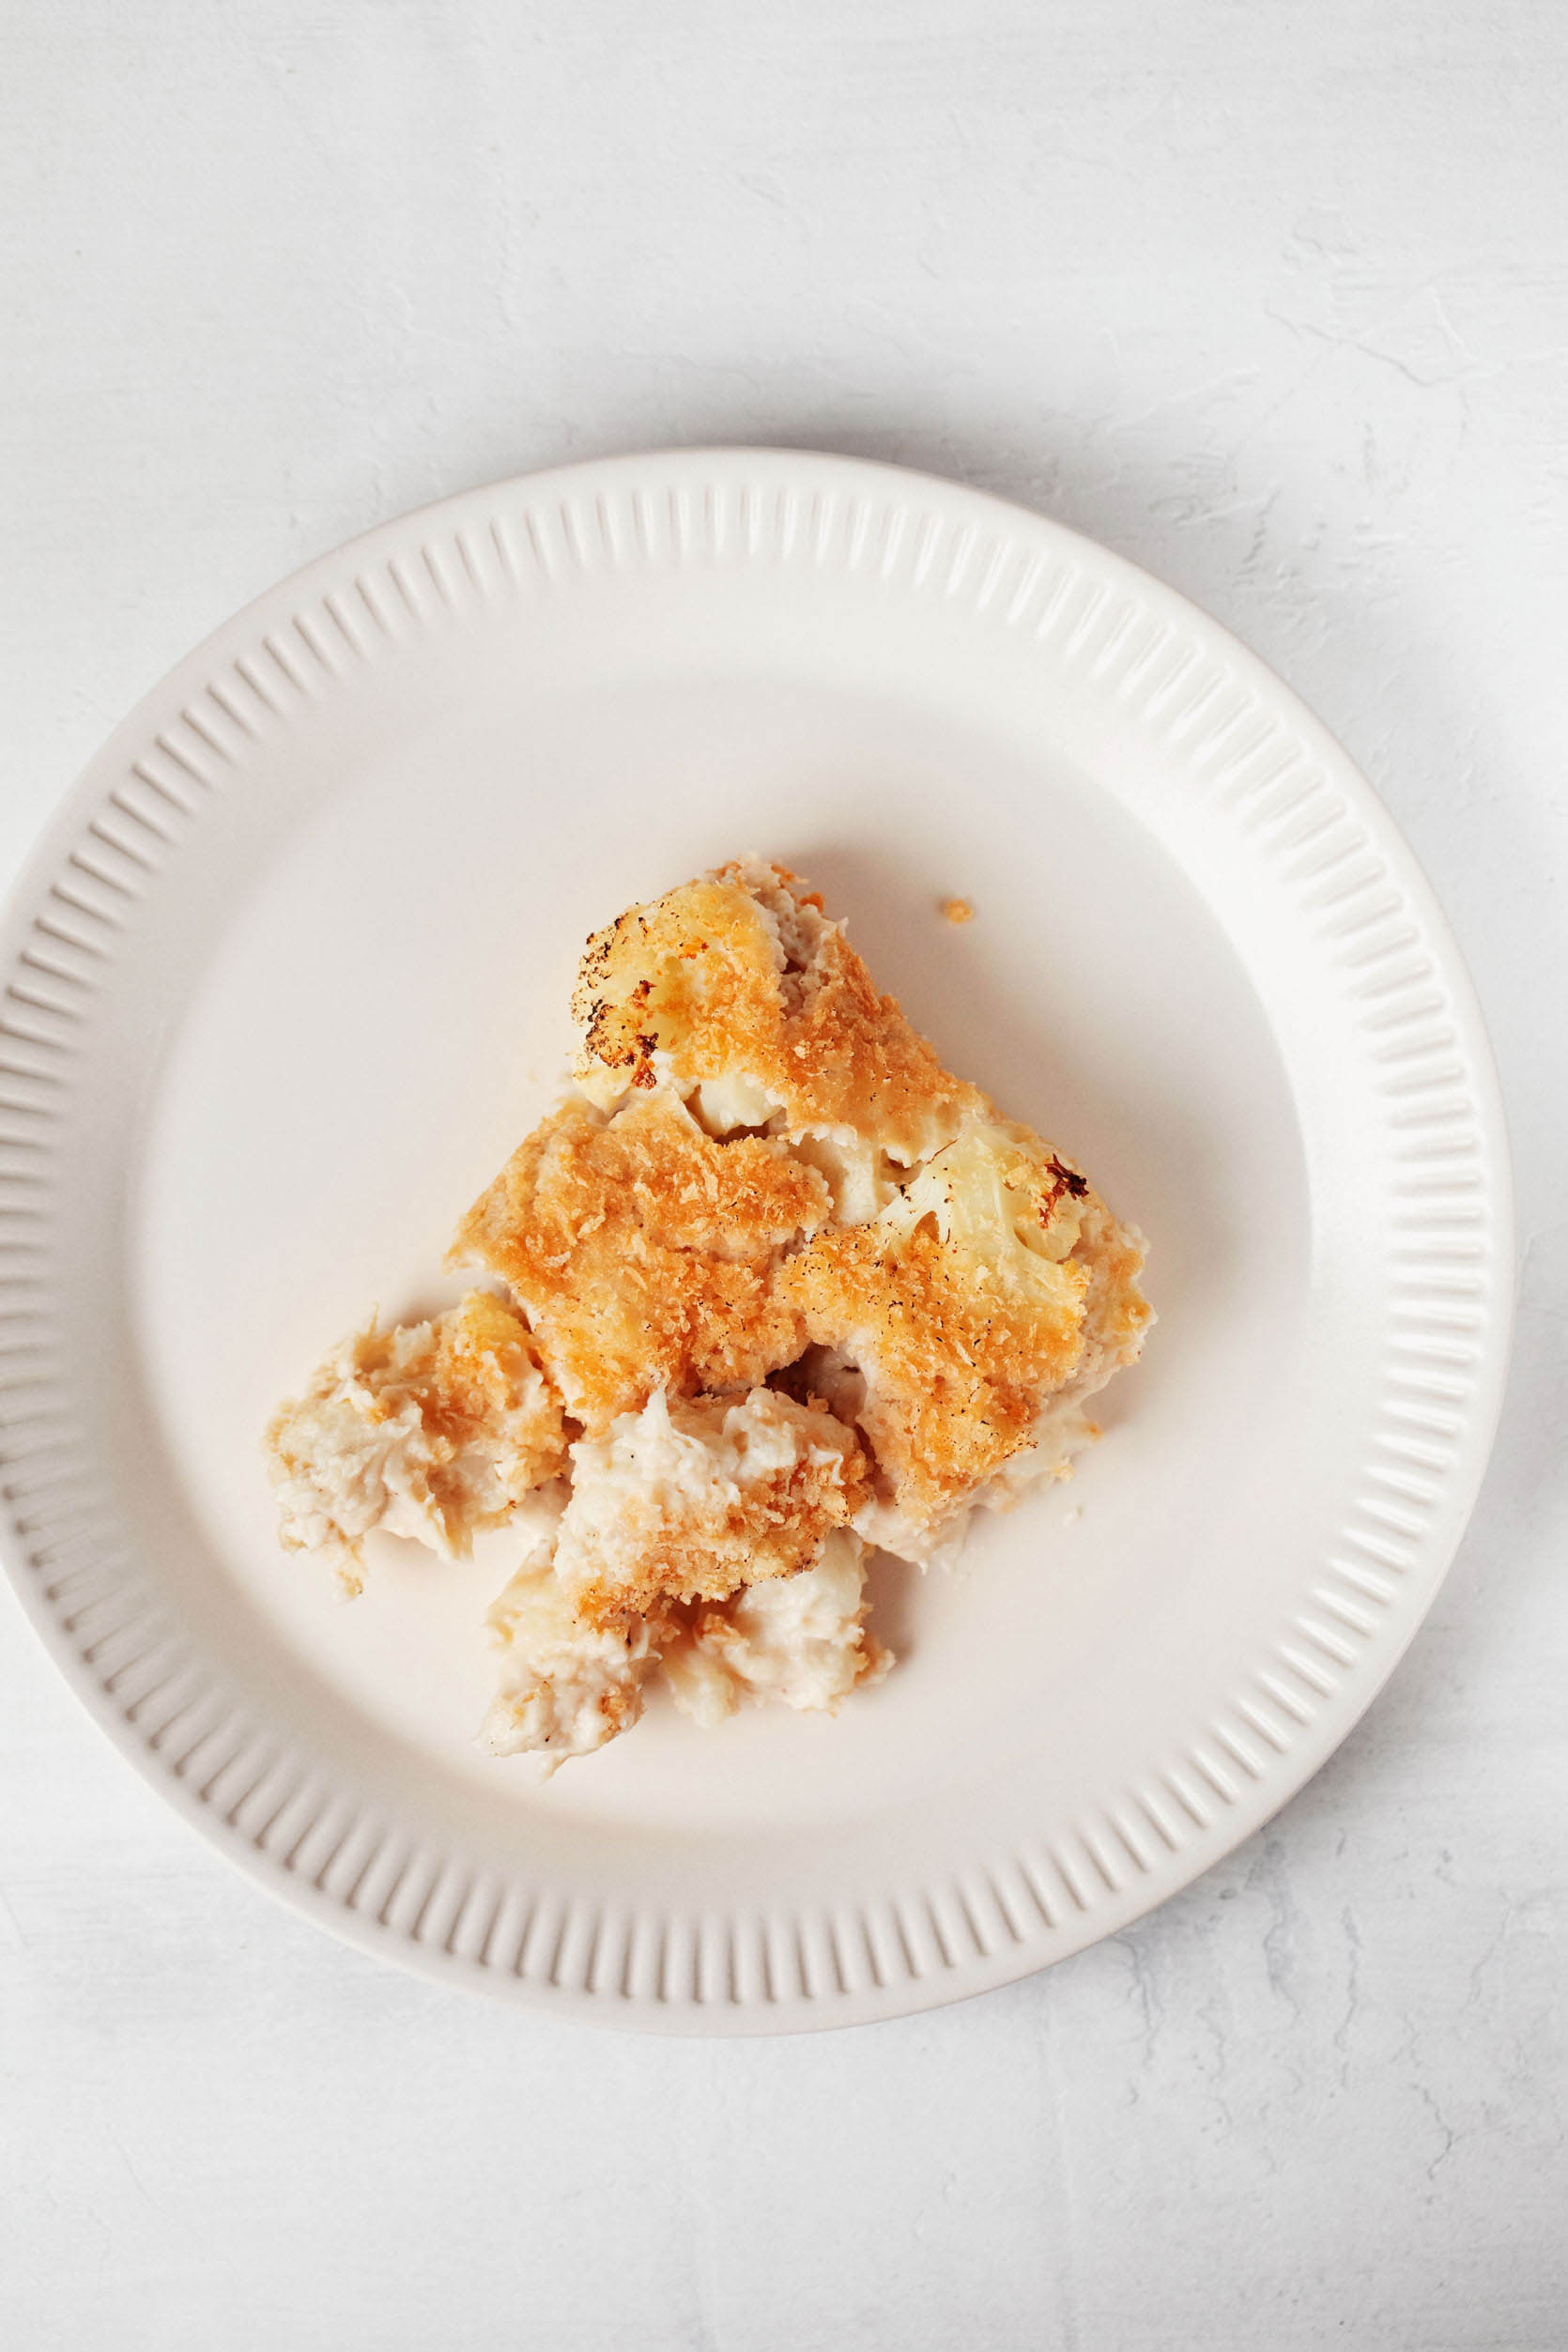 A single slice of a plant-based cauliflower gratin rests on a fluted white serving plate. It's topped with bread crumbs that have turned golden brown in the oven.